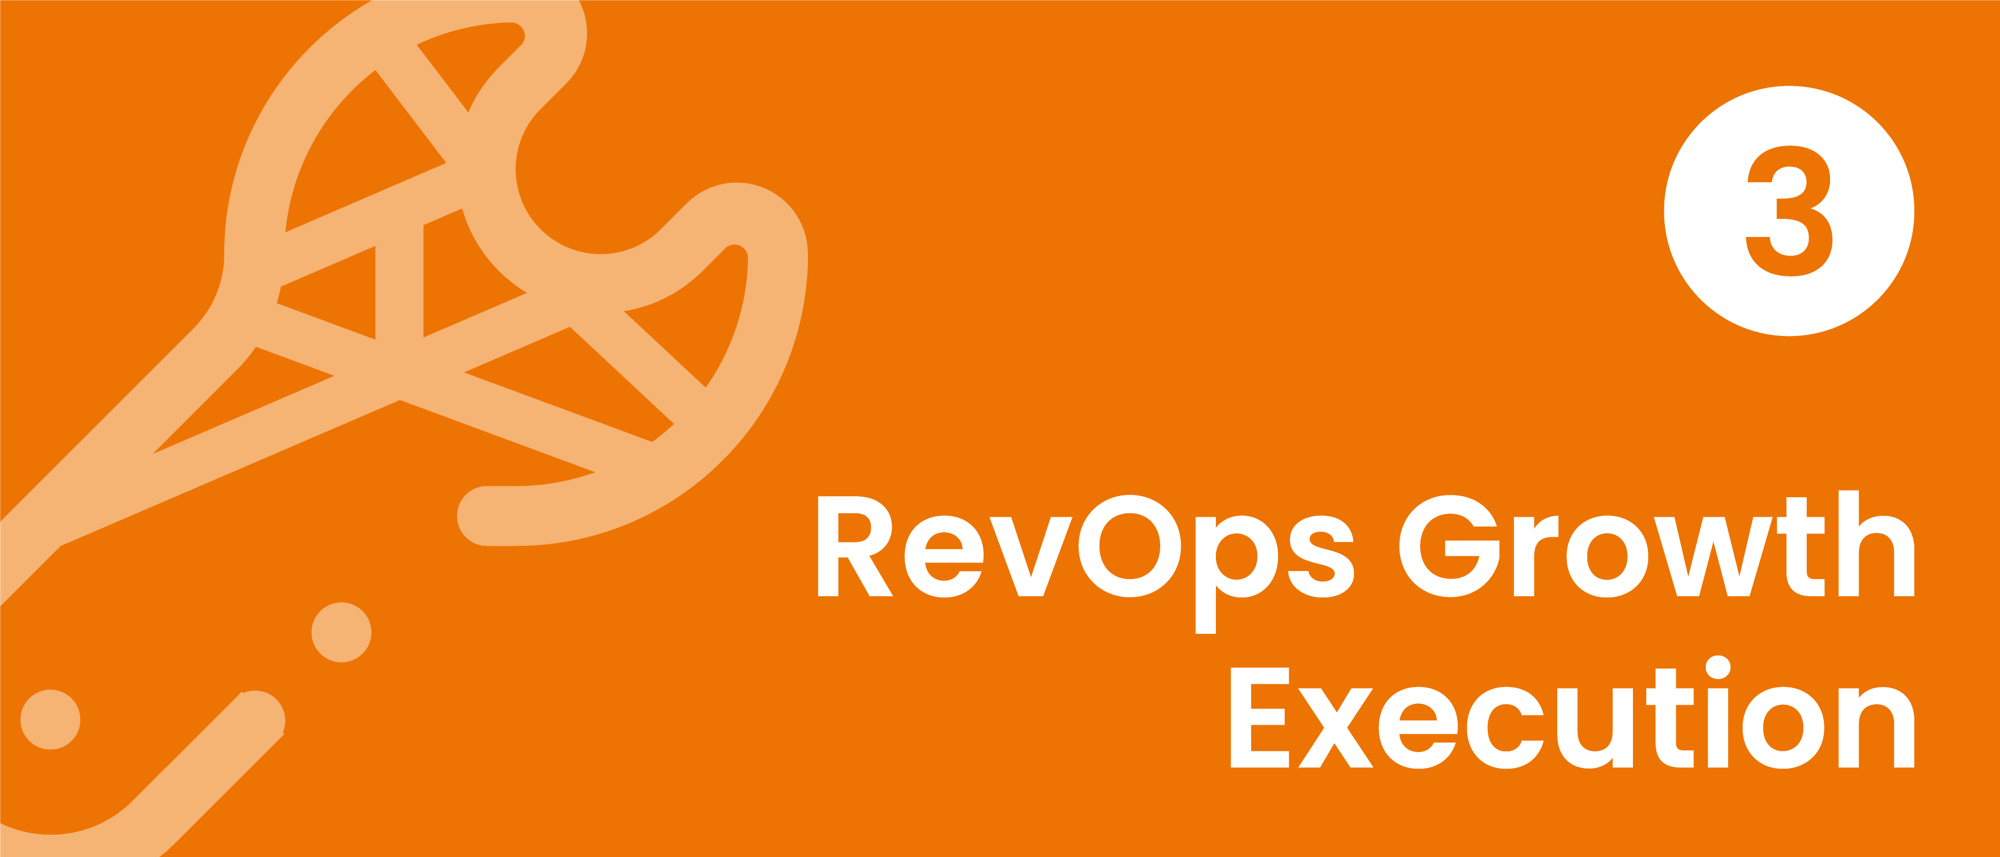 630 - Timeline Icons - 3. RevOps Growth Execution@3x